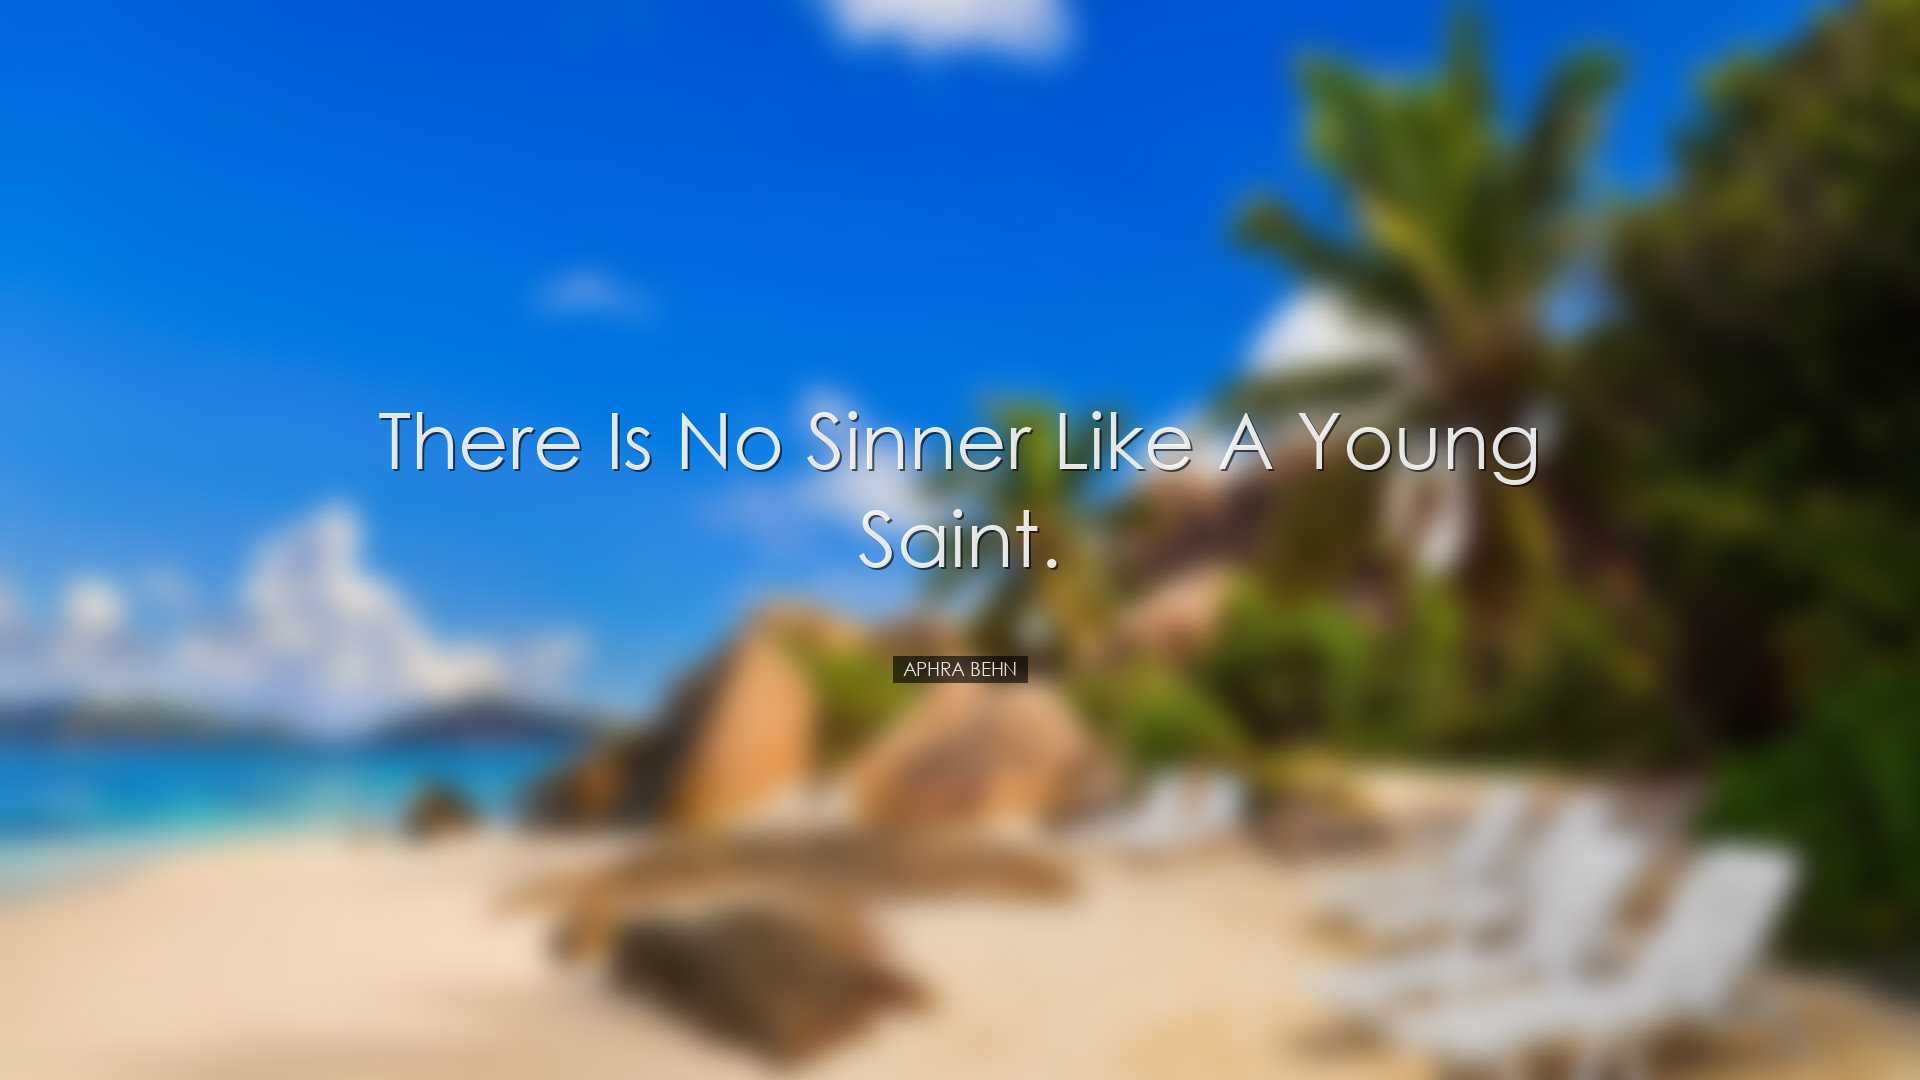 There is no sinner like a young saint. - Aphra Behn